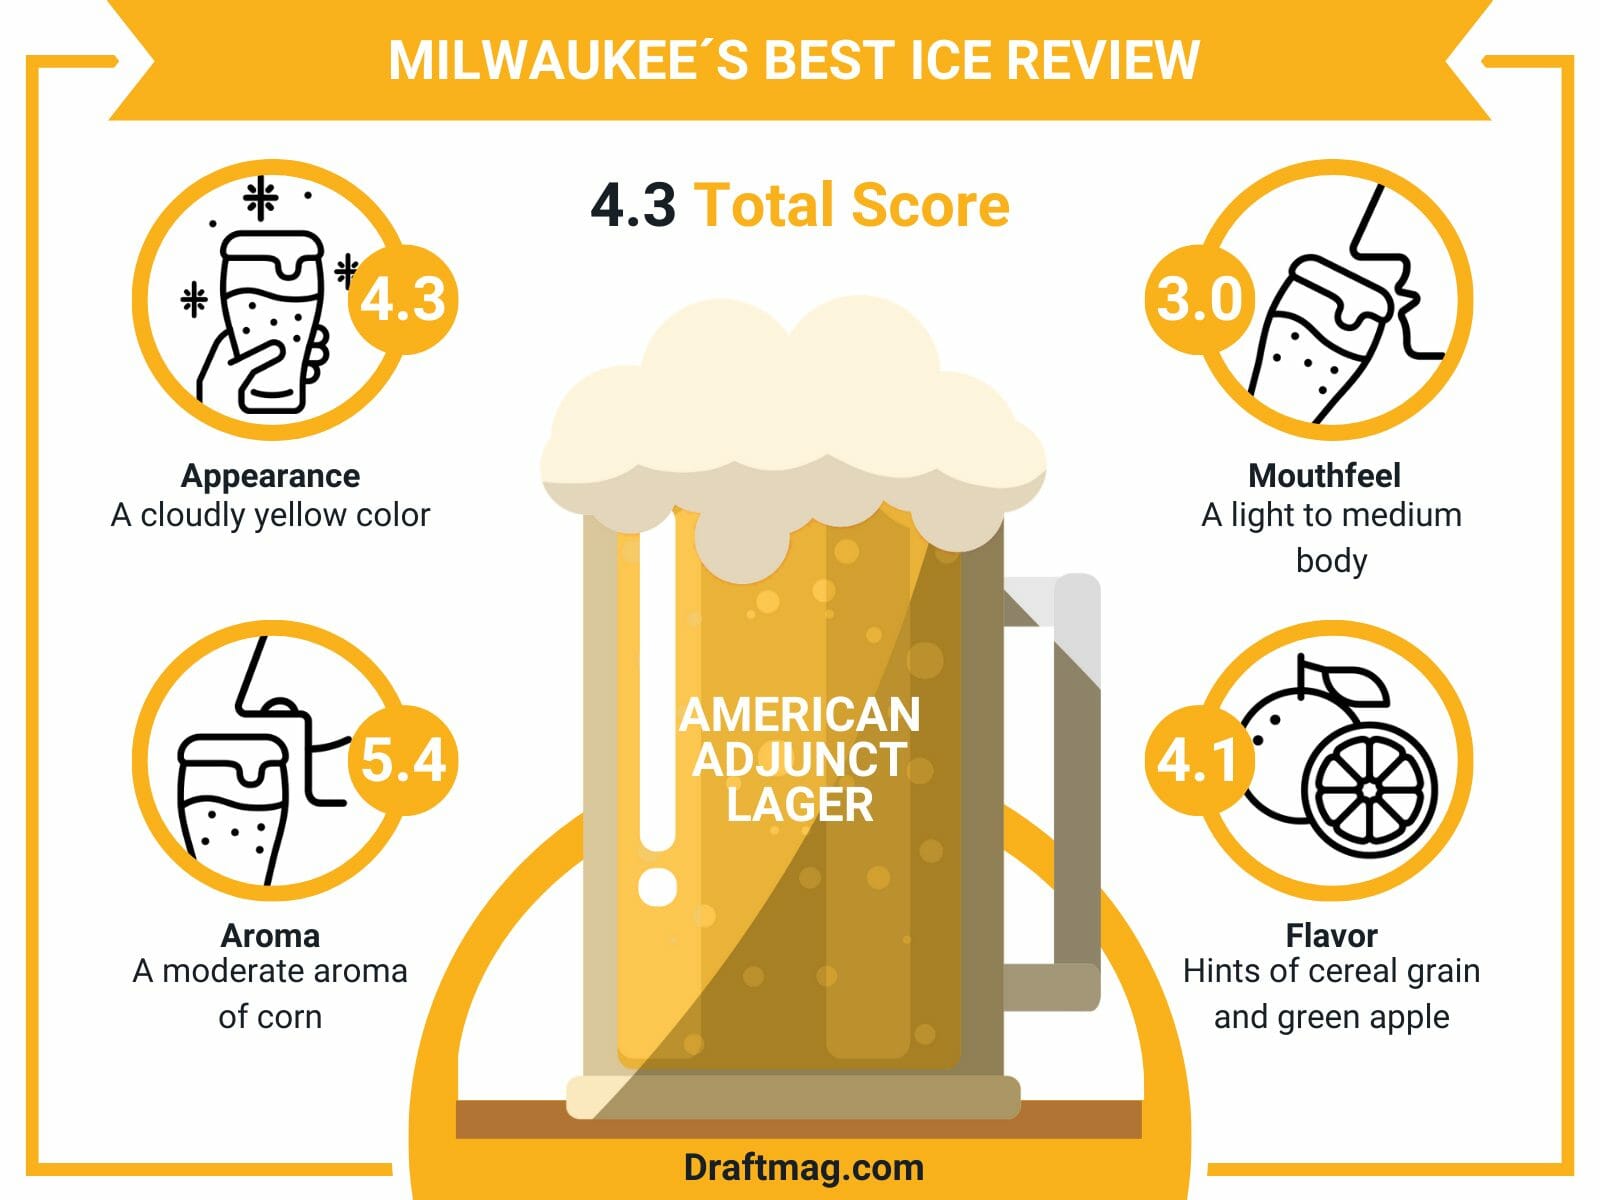 Milwaukee best ice review infographic